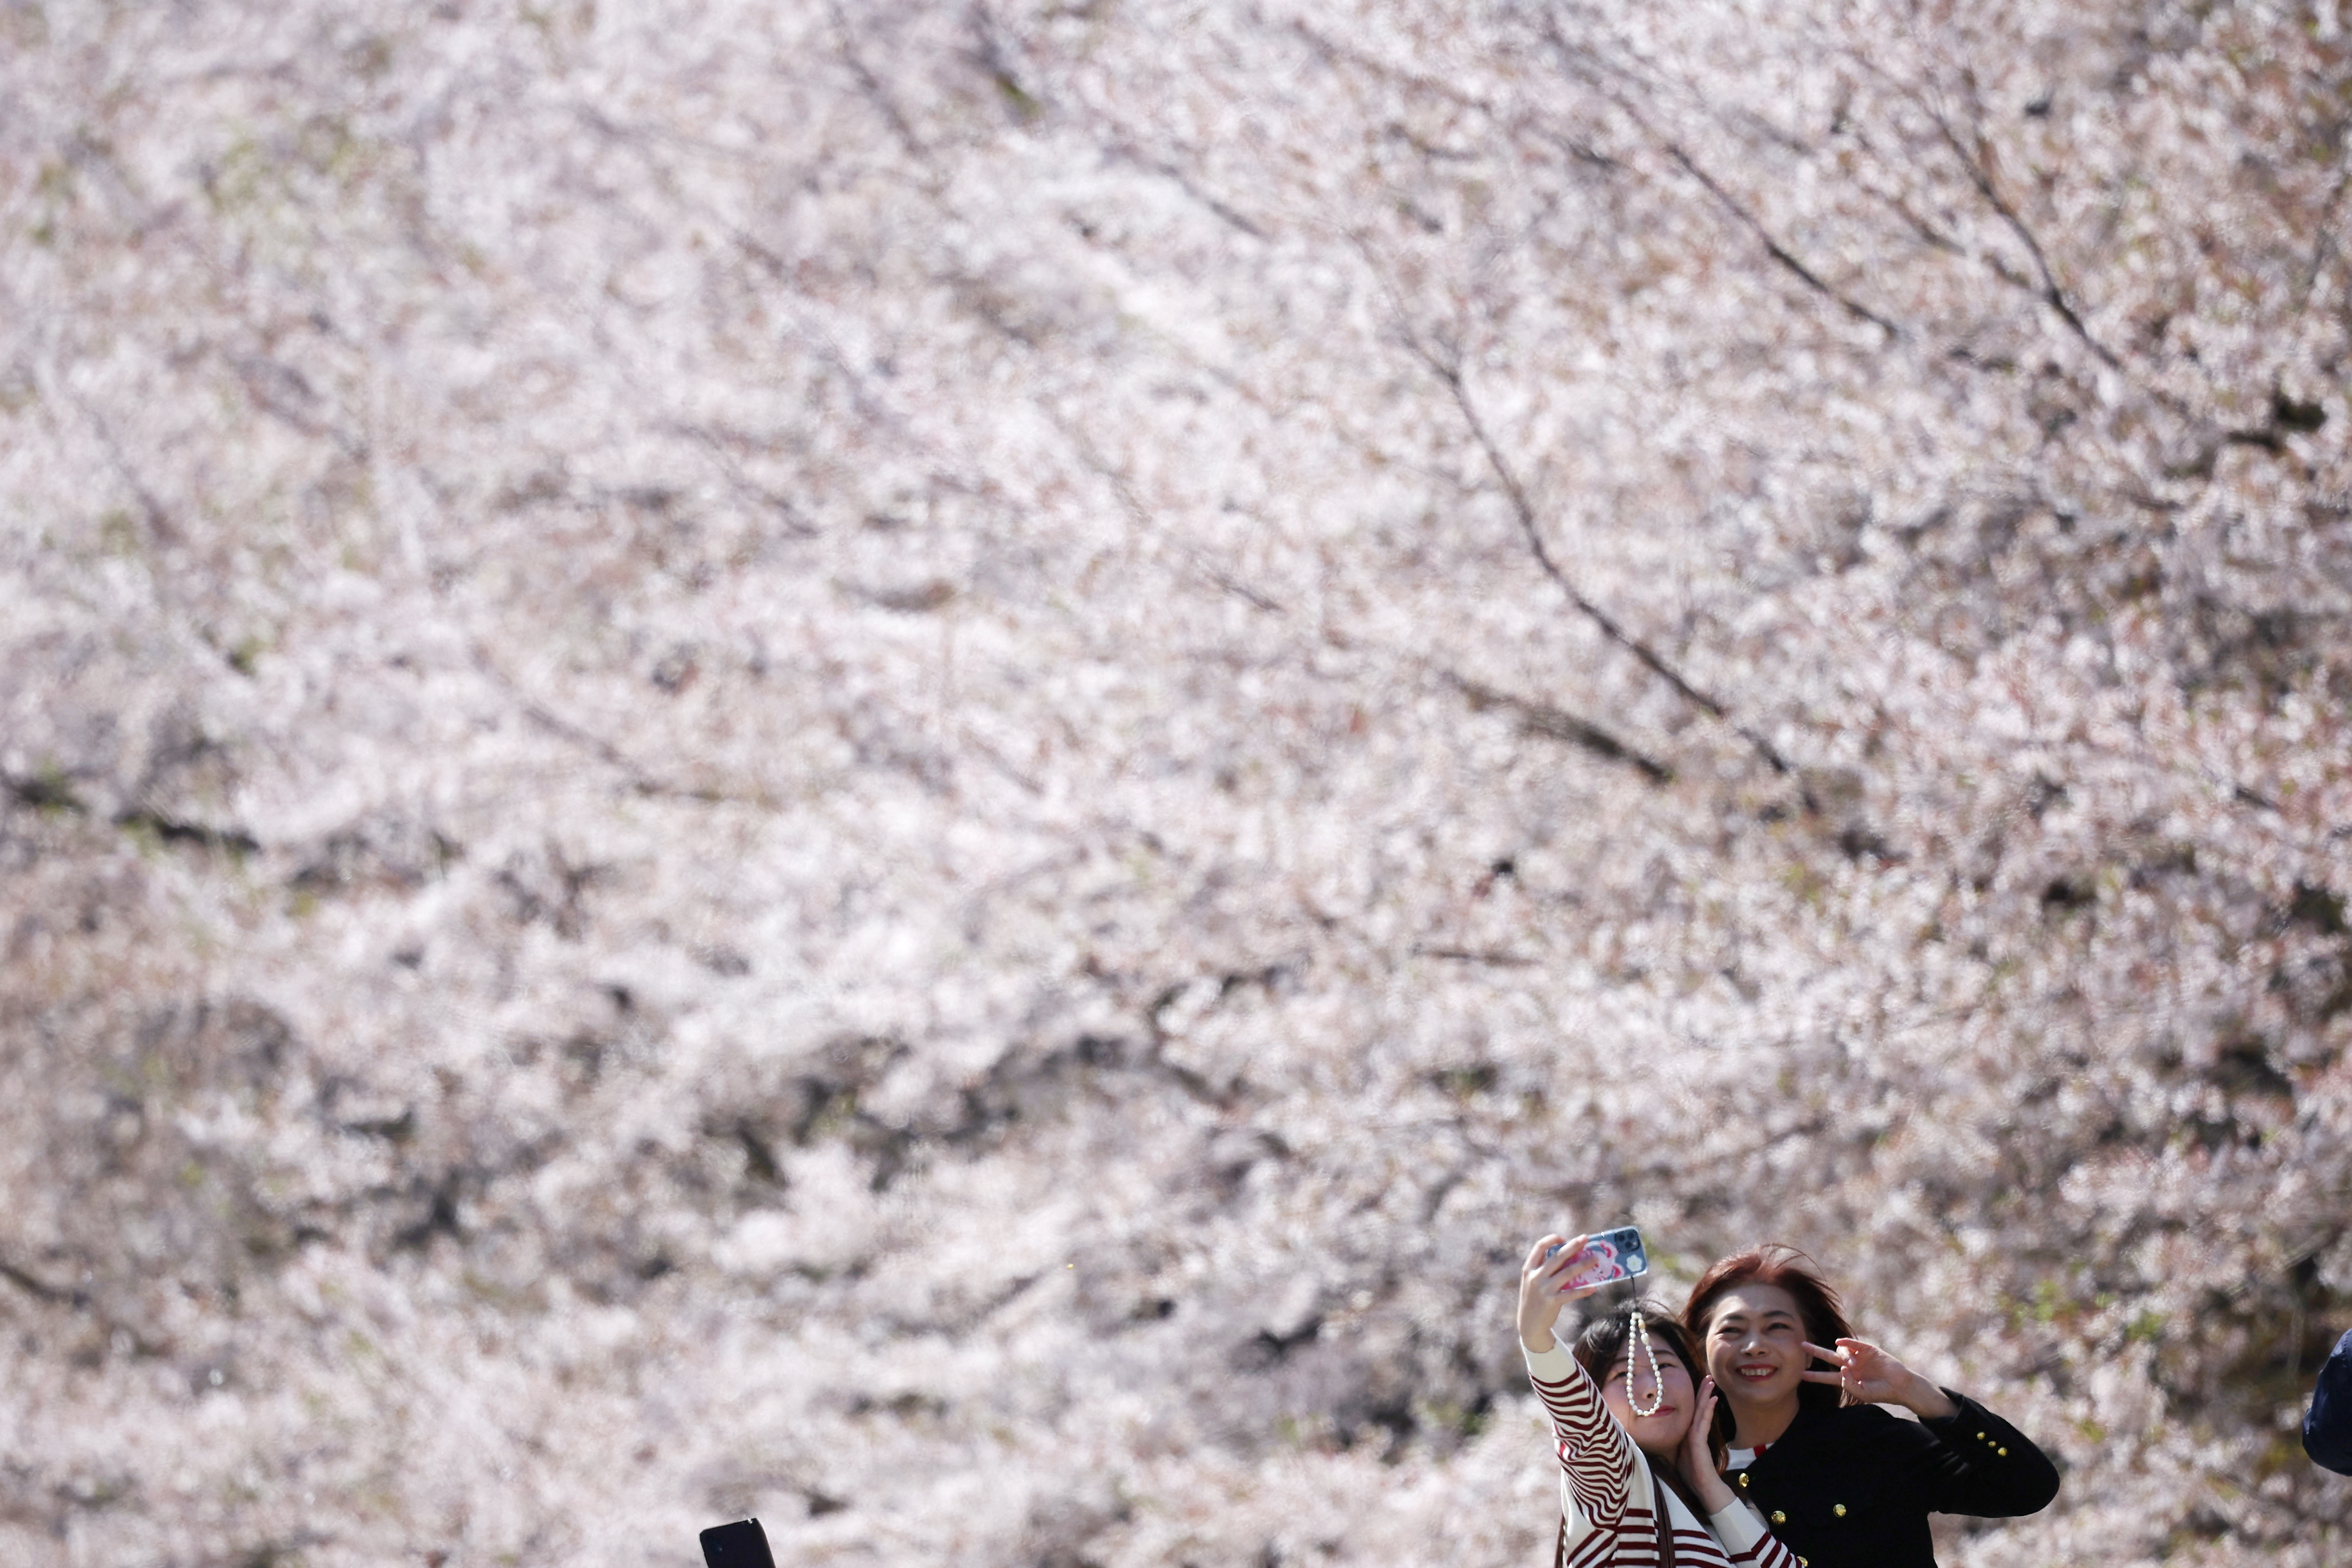 Women enjoy a sunny spring day under blooming cherry blossoms at a park in Seoul